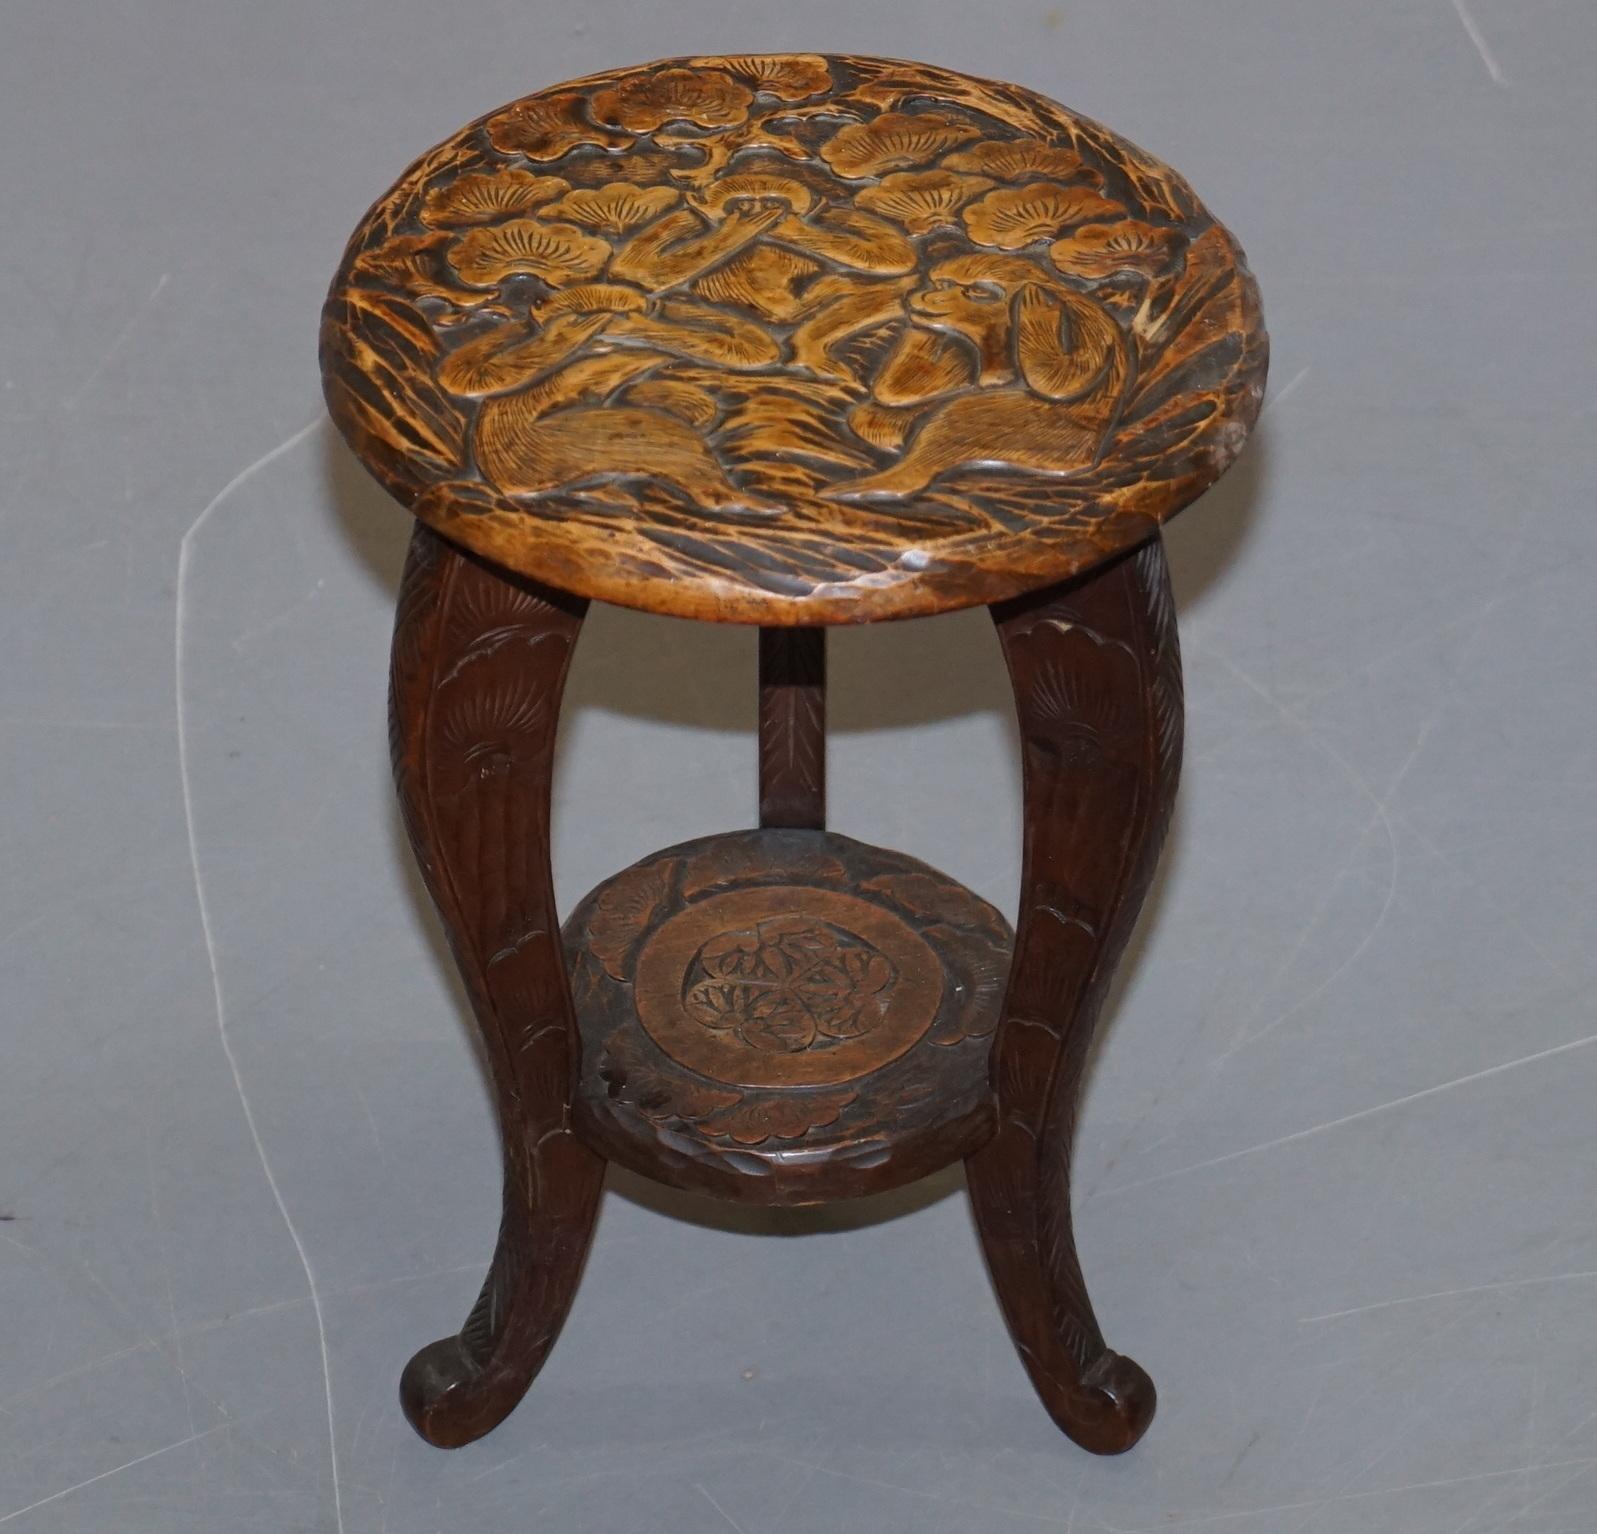 We are delighted to offer for sale this lovely pair of Liberty’s London 1905 Japanese mahogany side tables depicting the three monkeys in the 